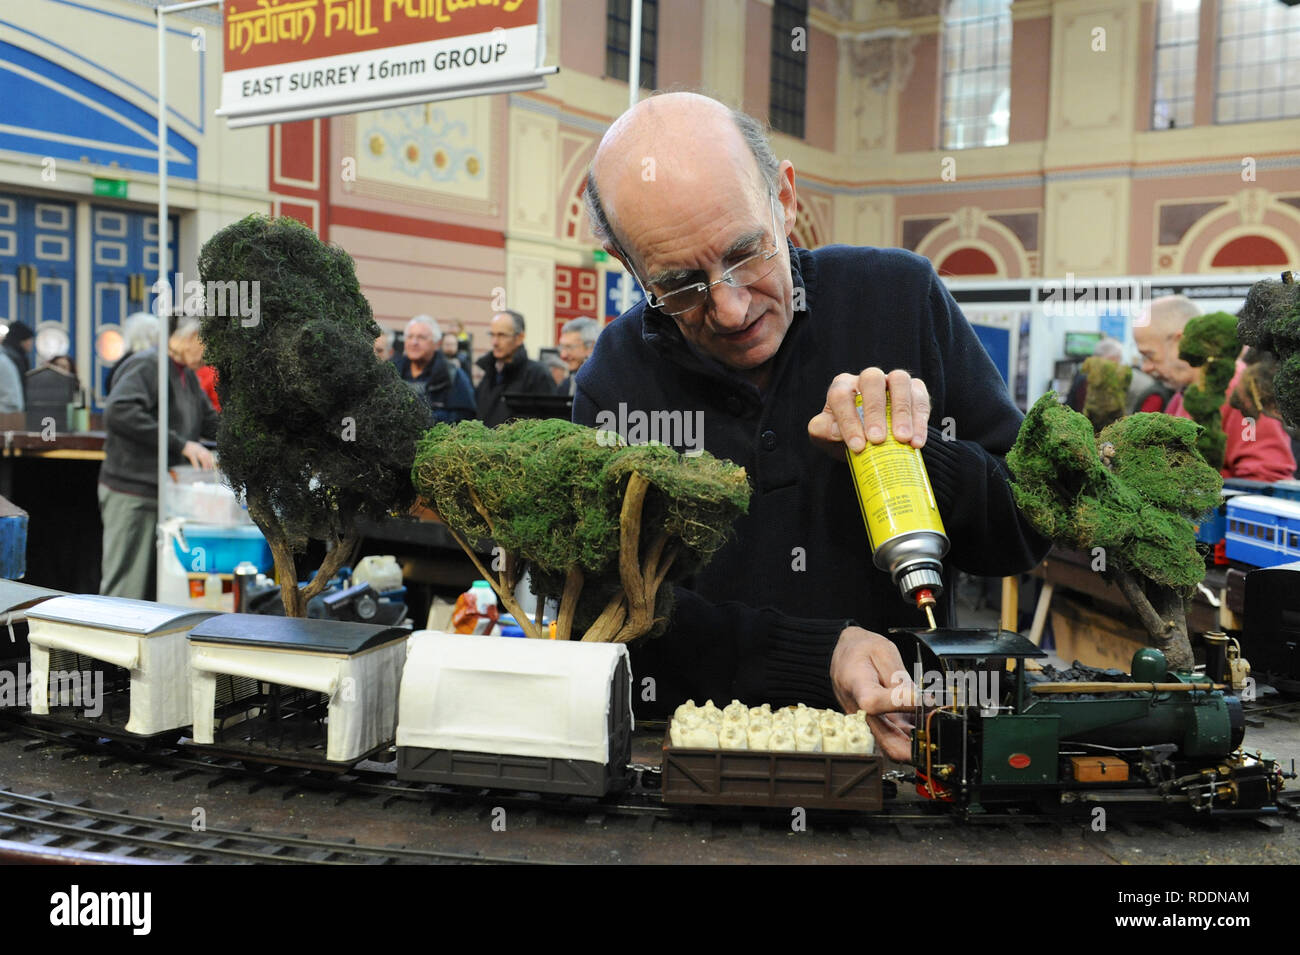 London, UK. 18th Jan 2019. A man getting preparing a 16mm narrow gauge train at the London Model Engineering Exhibition which opened today at Alexandra Palace, London.  The London Model Engineering Exhibition is now in its 23rd year, and attracts around 14,000 visitors.  The show offers a showcase to the full spectrum of modelling from traditional model engineering, steam locomotives and traction engines through to the more modern gadget and boys toys including trucks, boats, aeroplanes and helicopters. Credit: Michael Preston/Alamy Live News Stock Photo